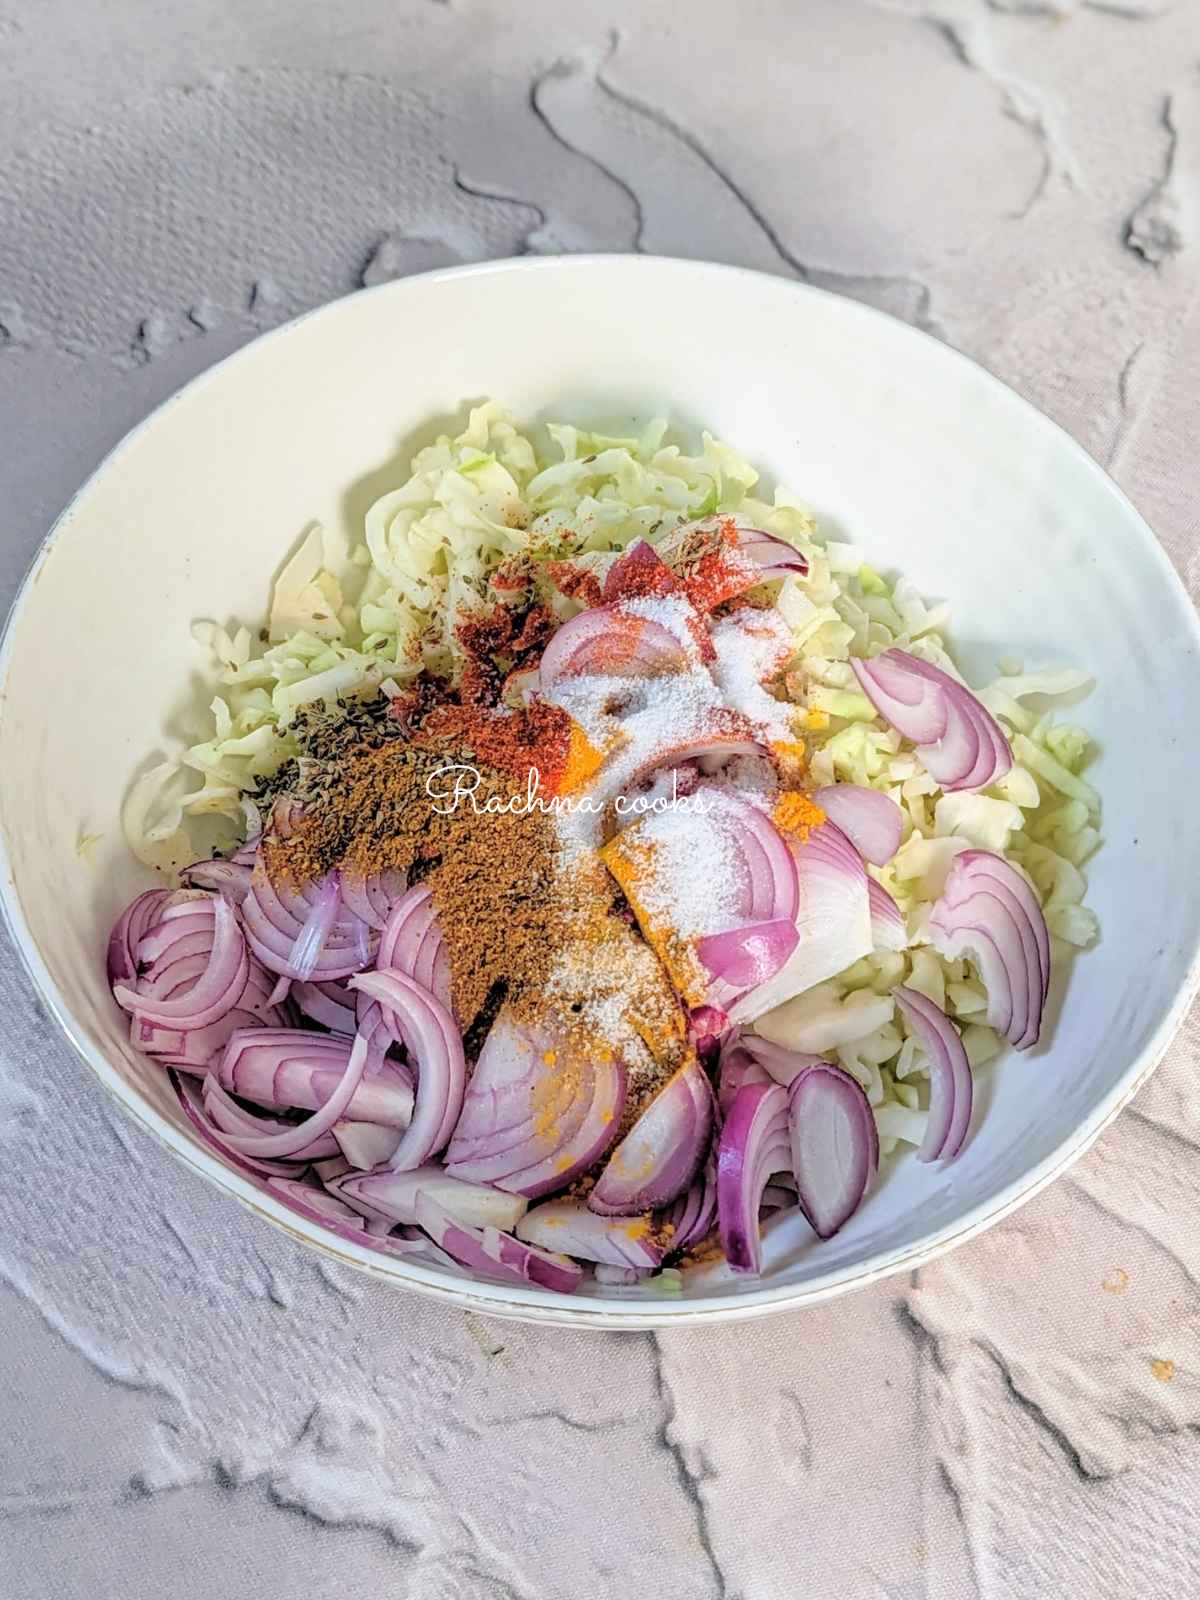 Shredded cabbage, sliced onion with spices and seasonings in a bowl.